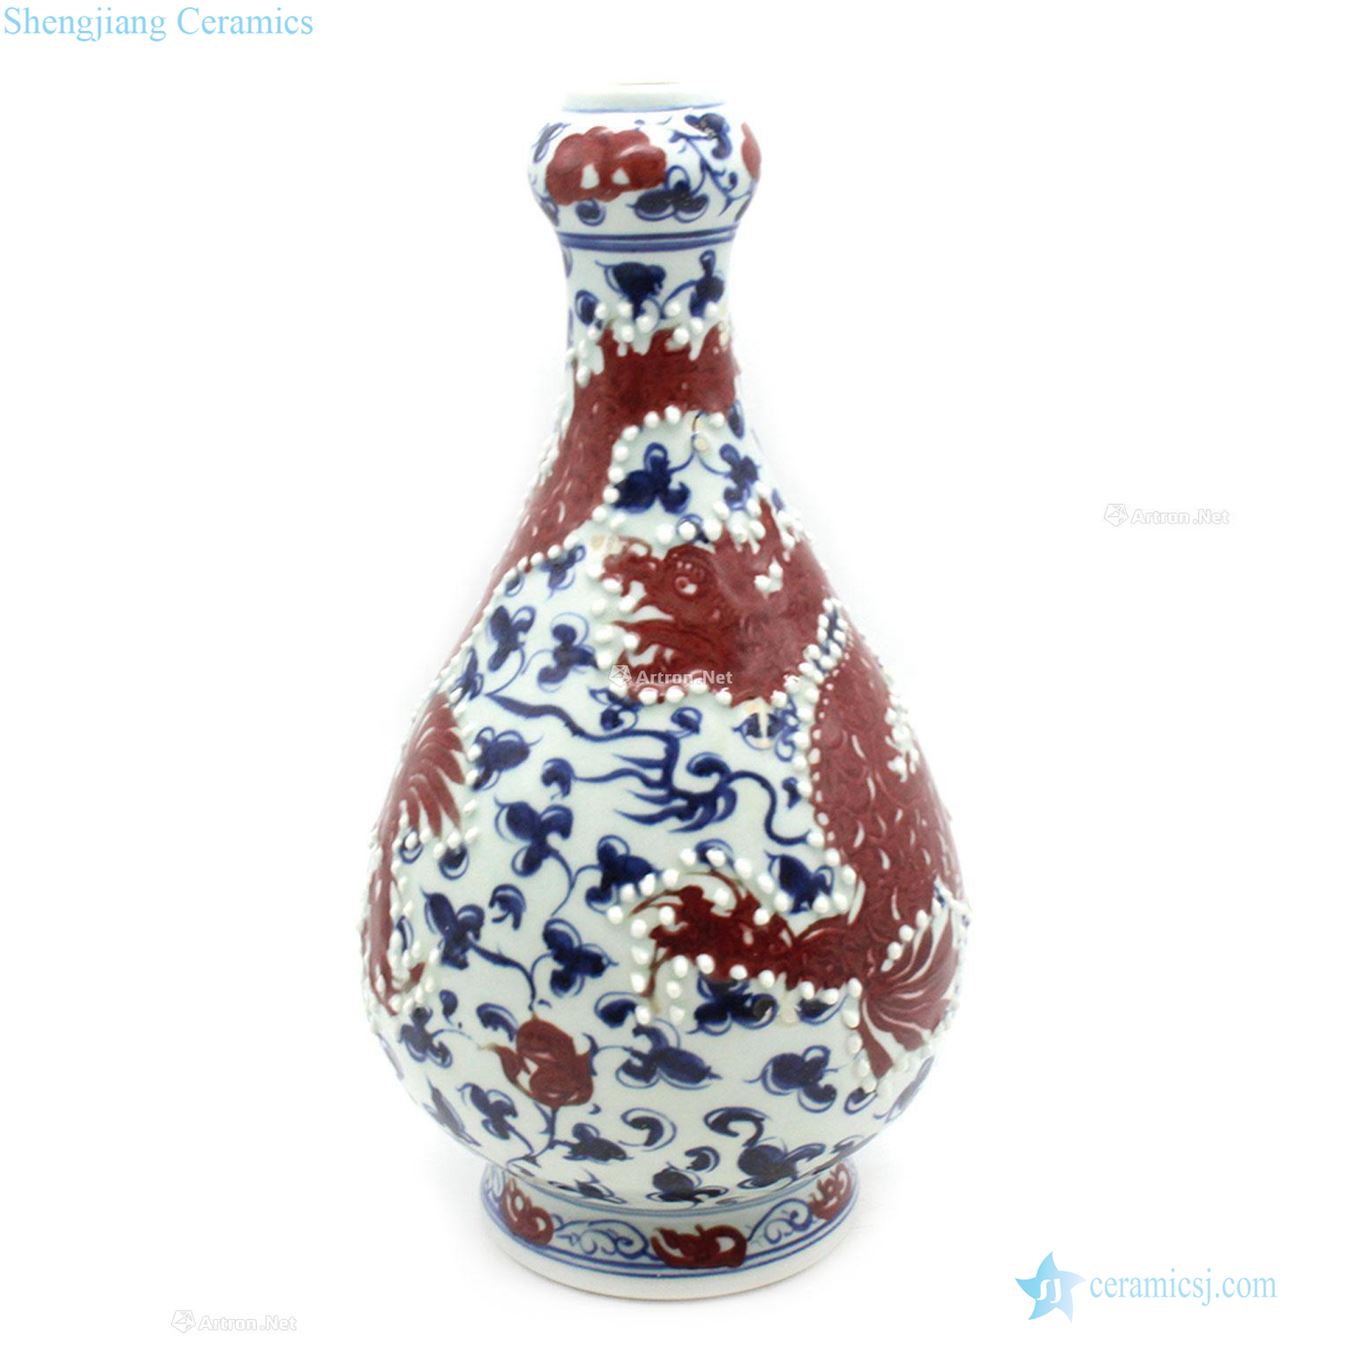 At the end of the yuan Ming Pearl to blue and white youligong red dragon grain bottle of garlic